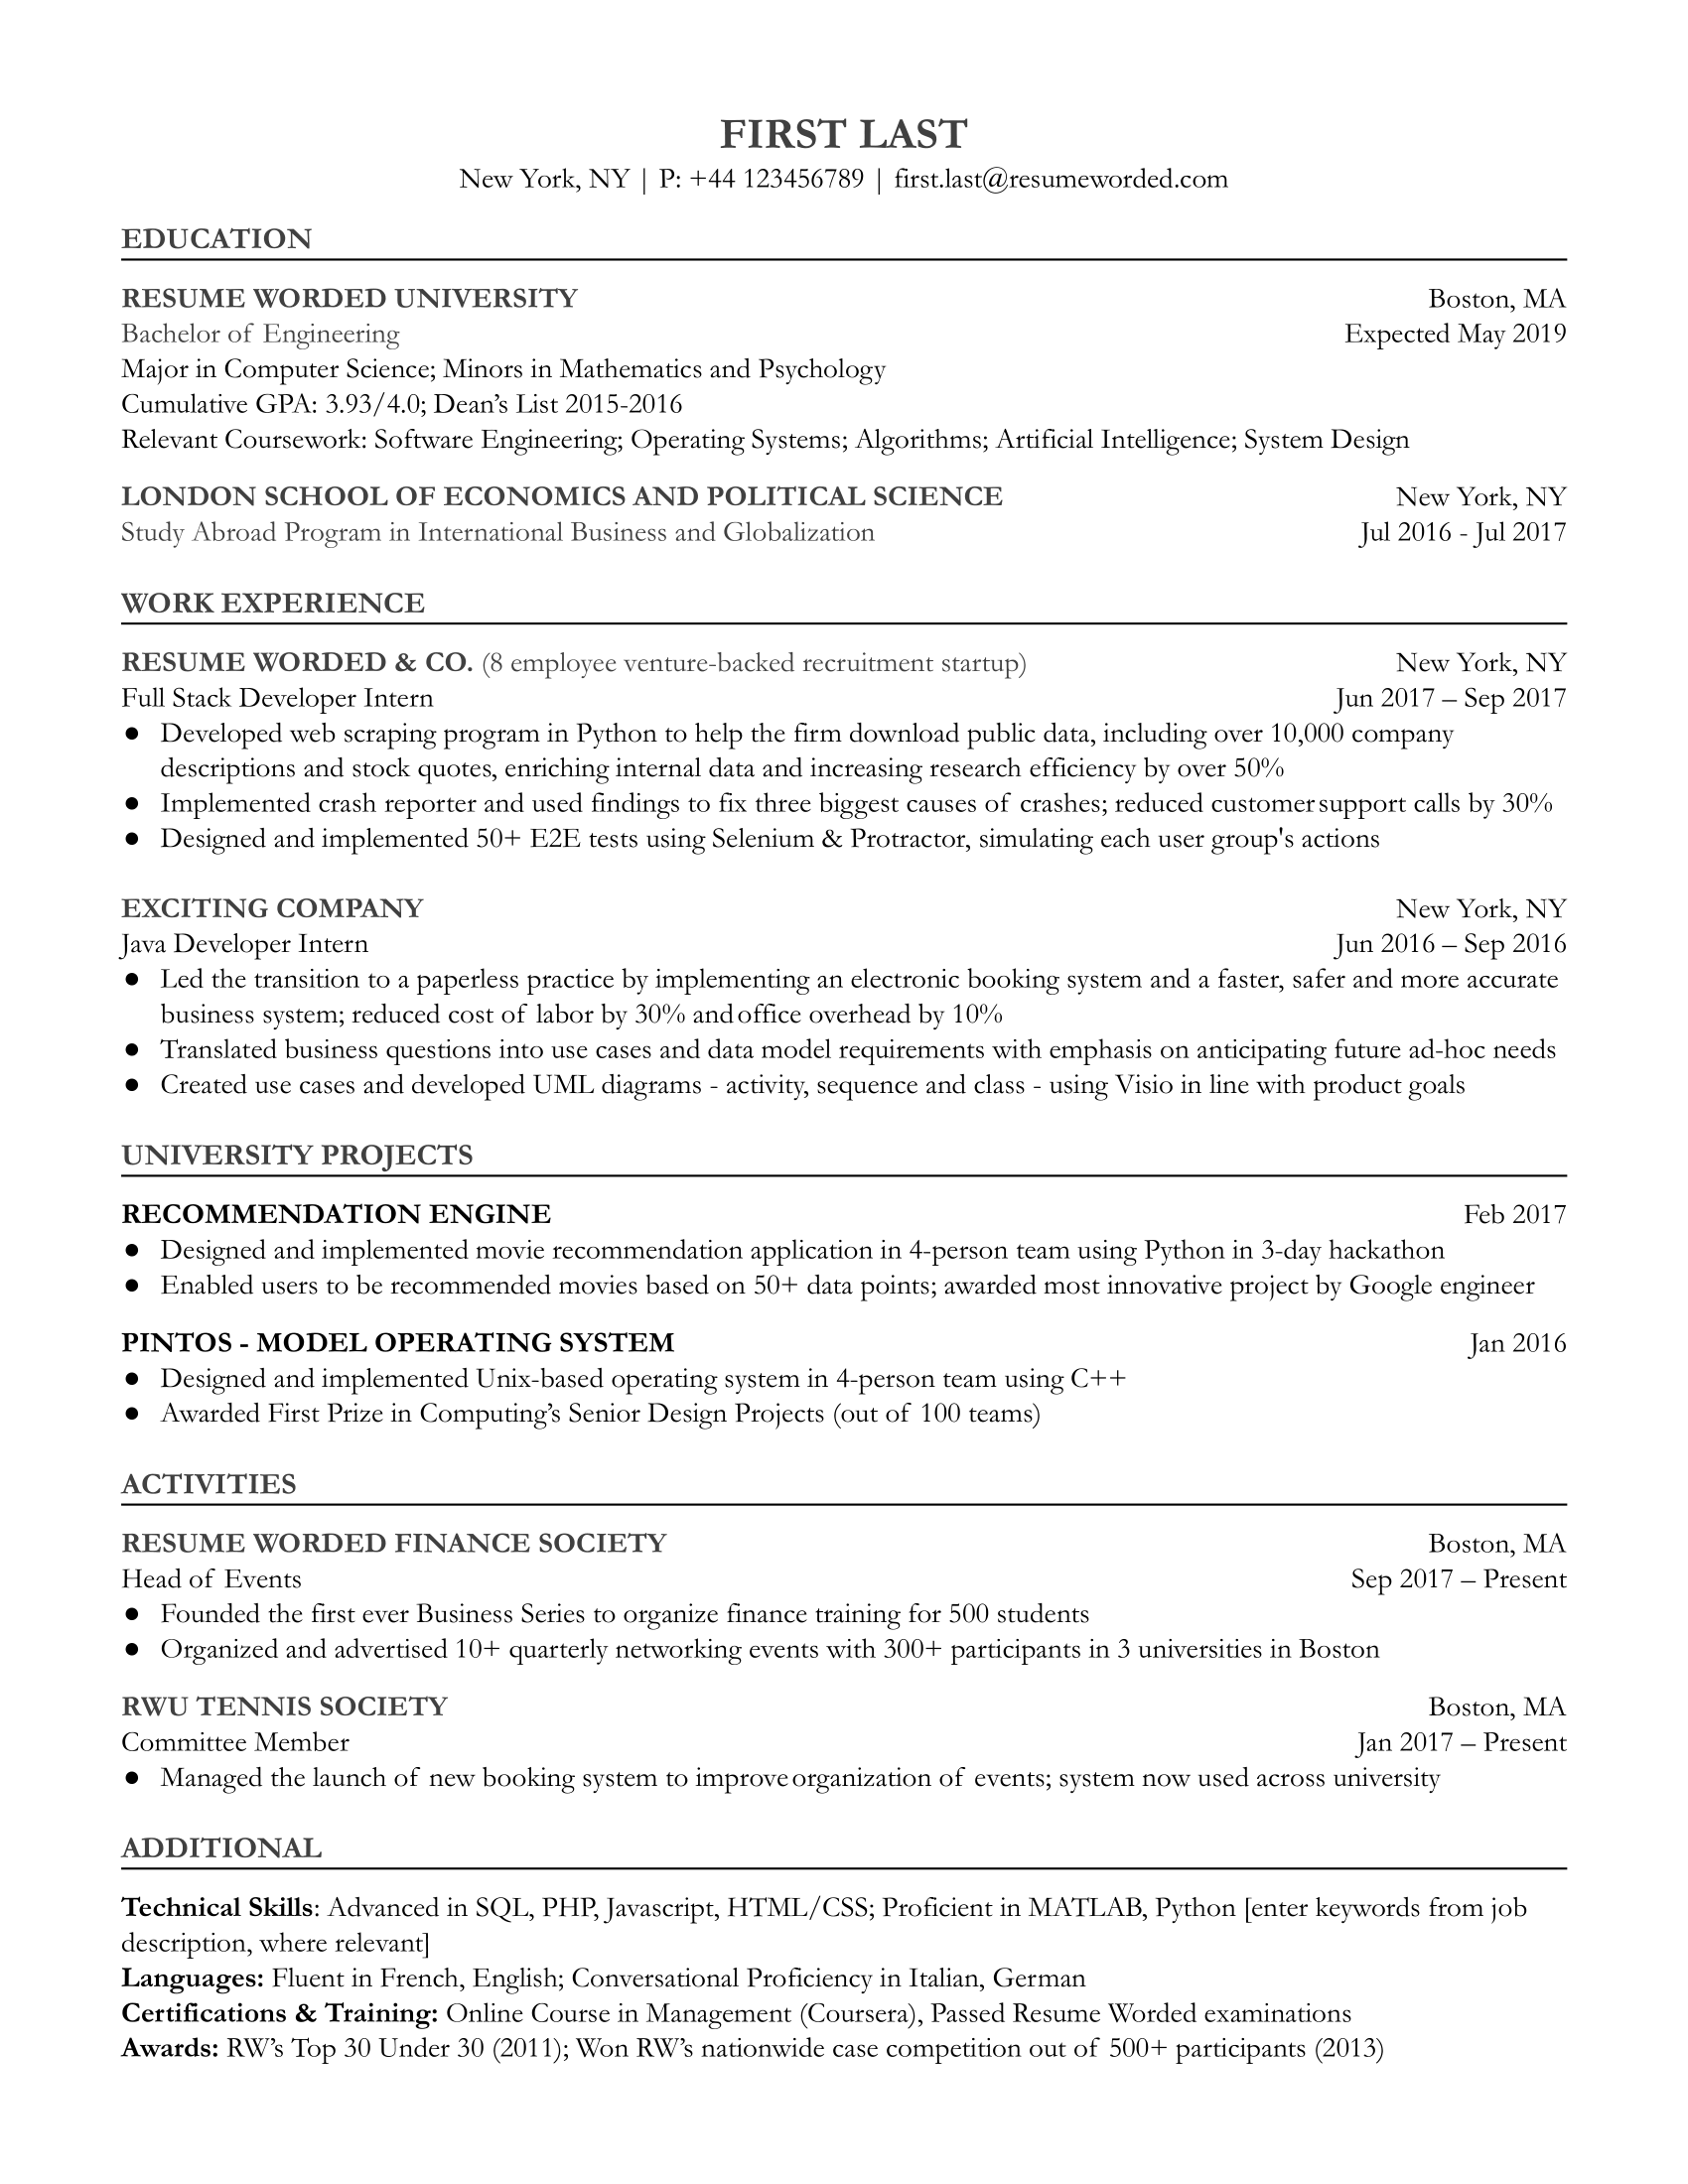 An entry level full stack developer resume that primarily focuses on education, internship experience, supplemented by university projects and skills.